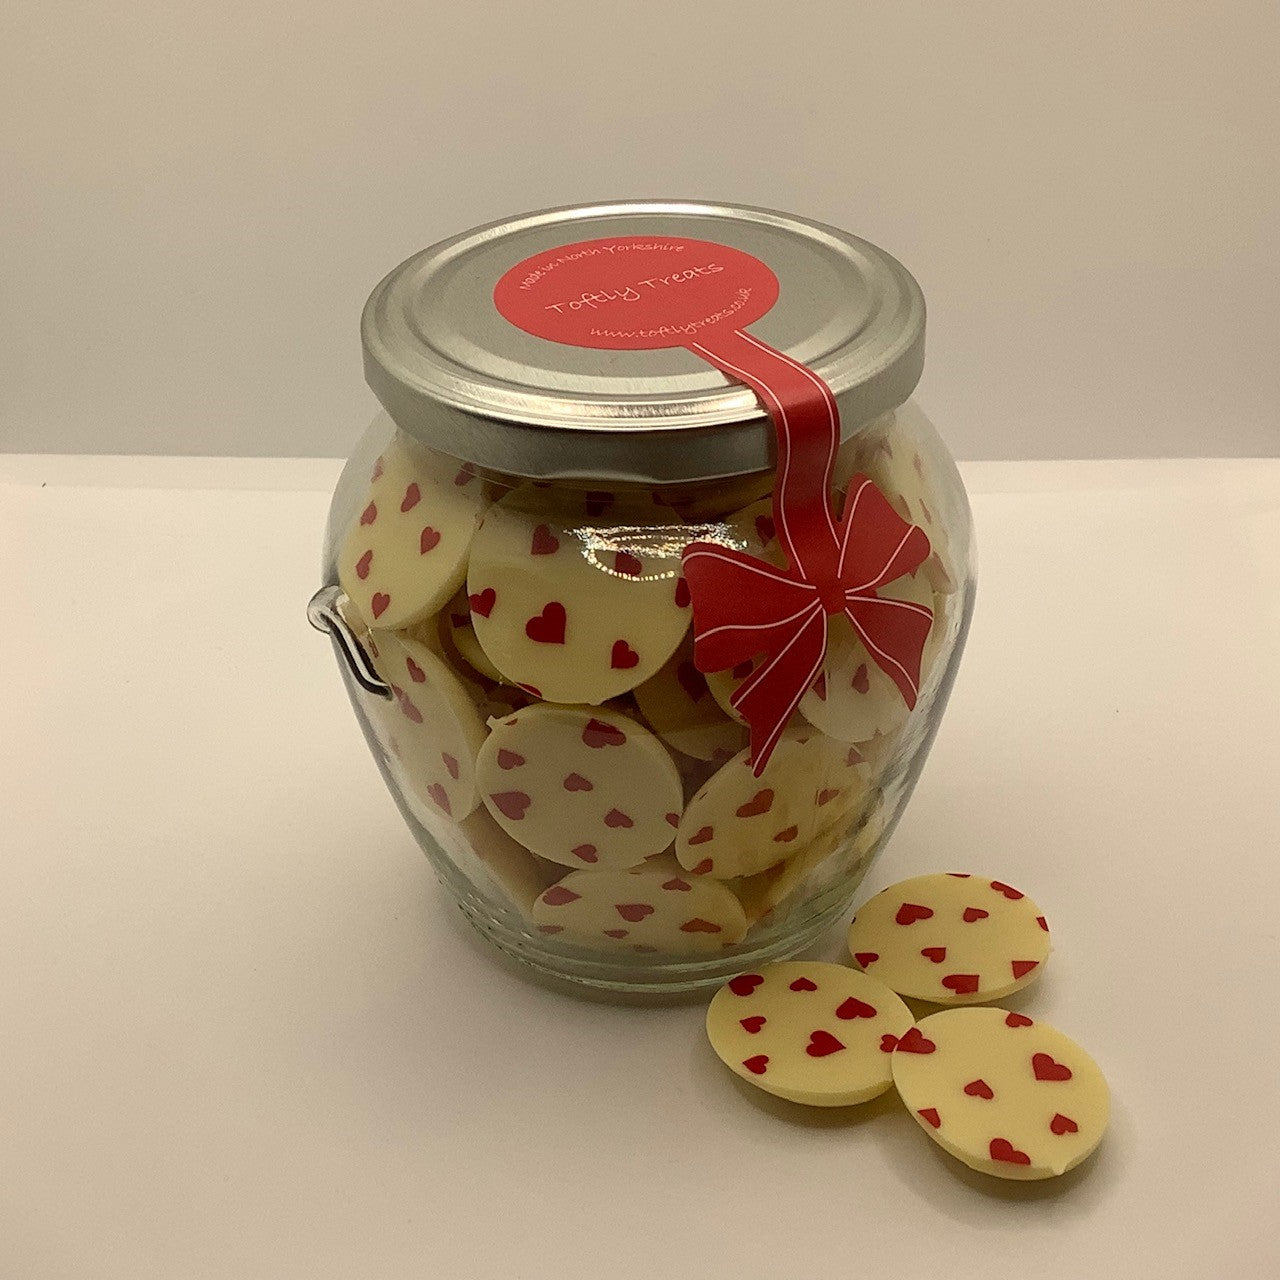 Red Hearts (White chocolate)